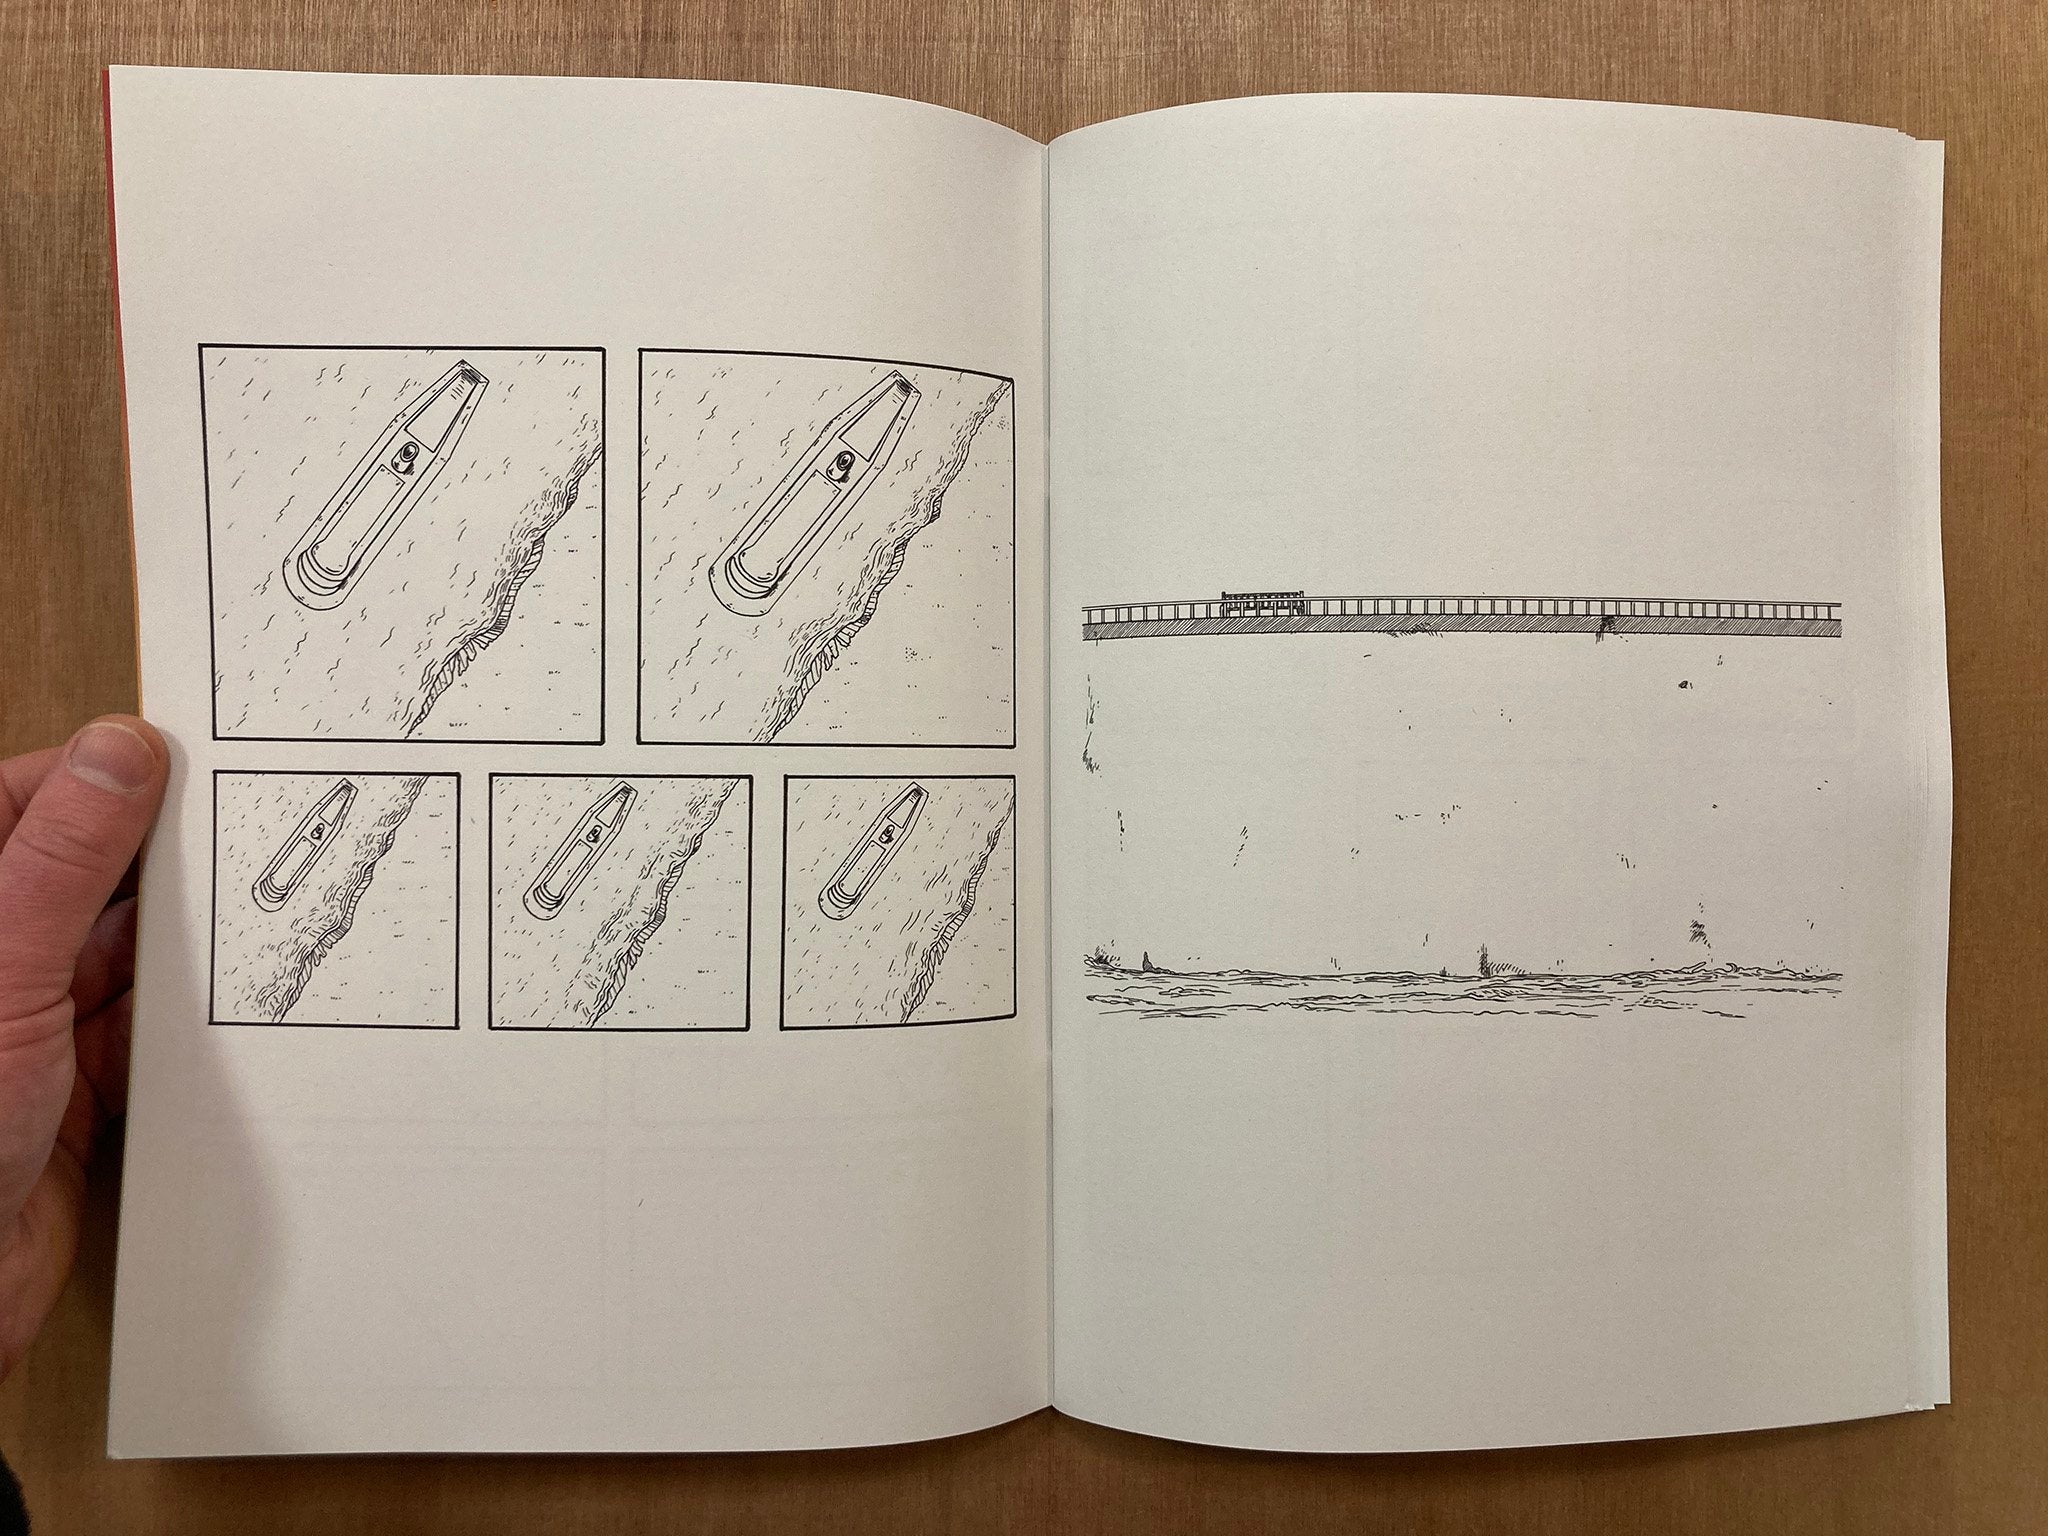 THE FLOATING BRIDGE #2 by Rob Churm and Malcy Duff